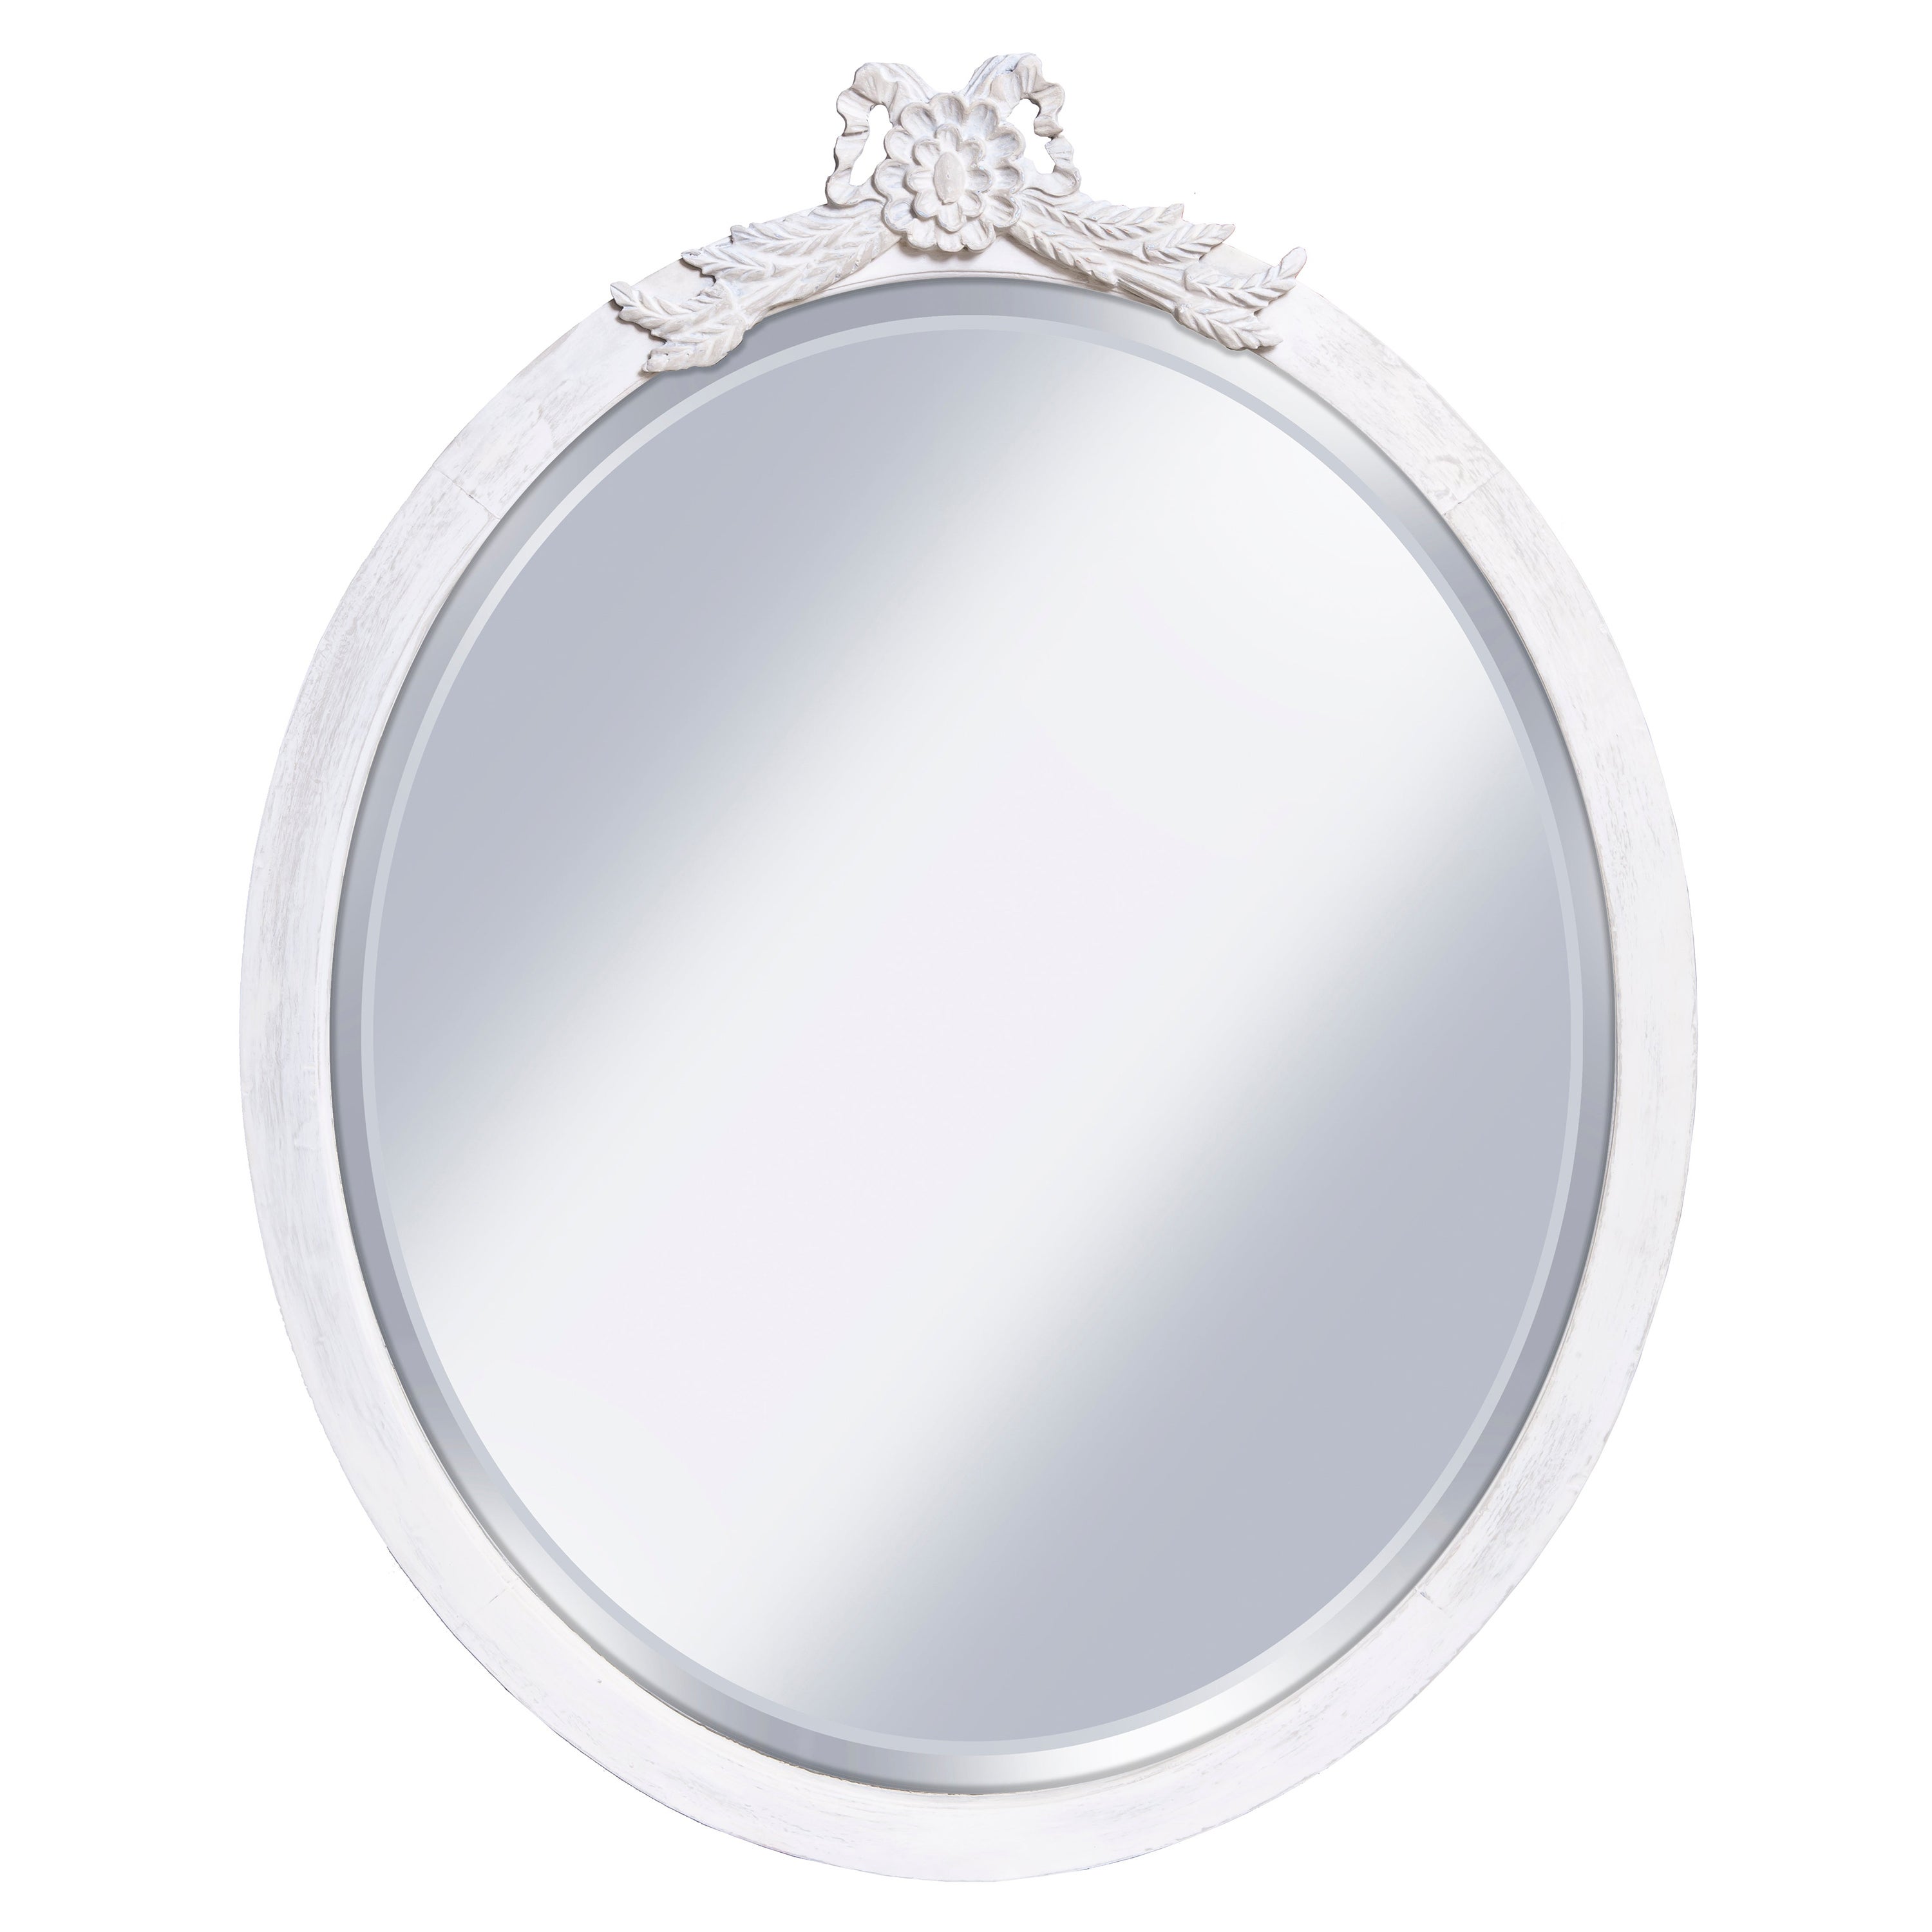 Hand Carved & Hand-Cut Large Oval Beveled Mirror For Sale